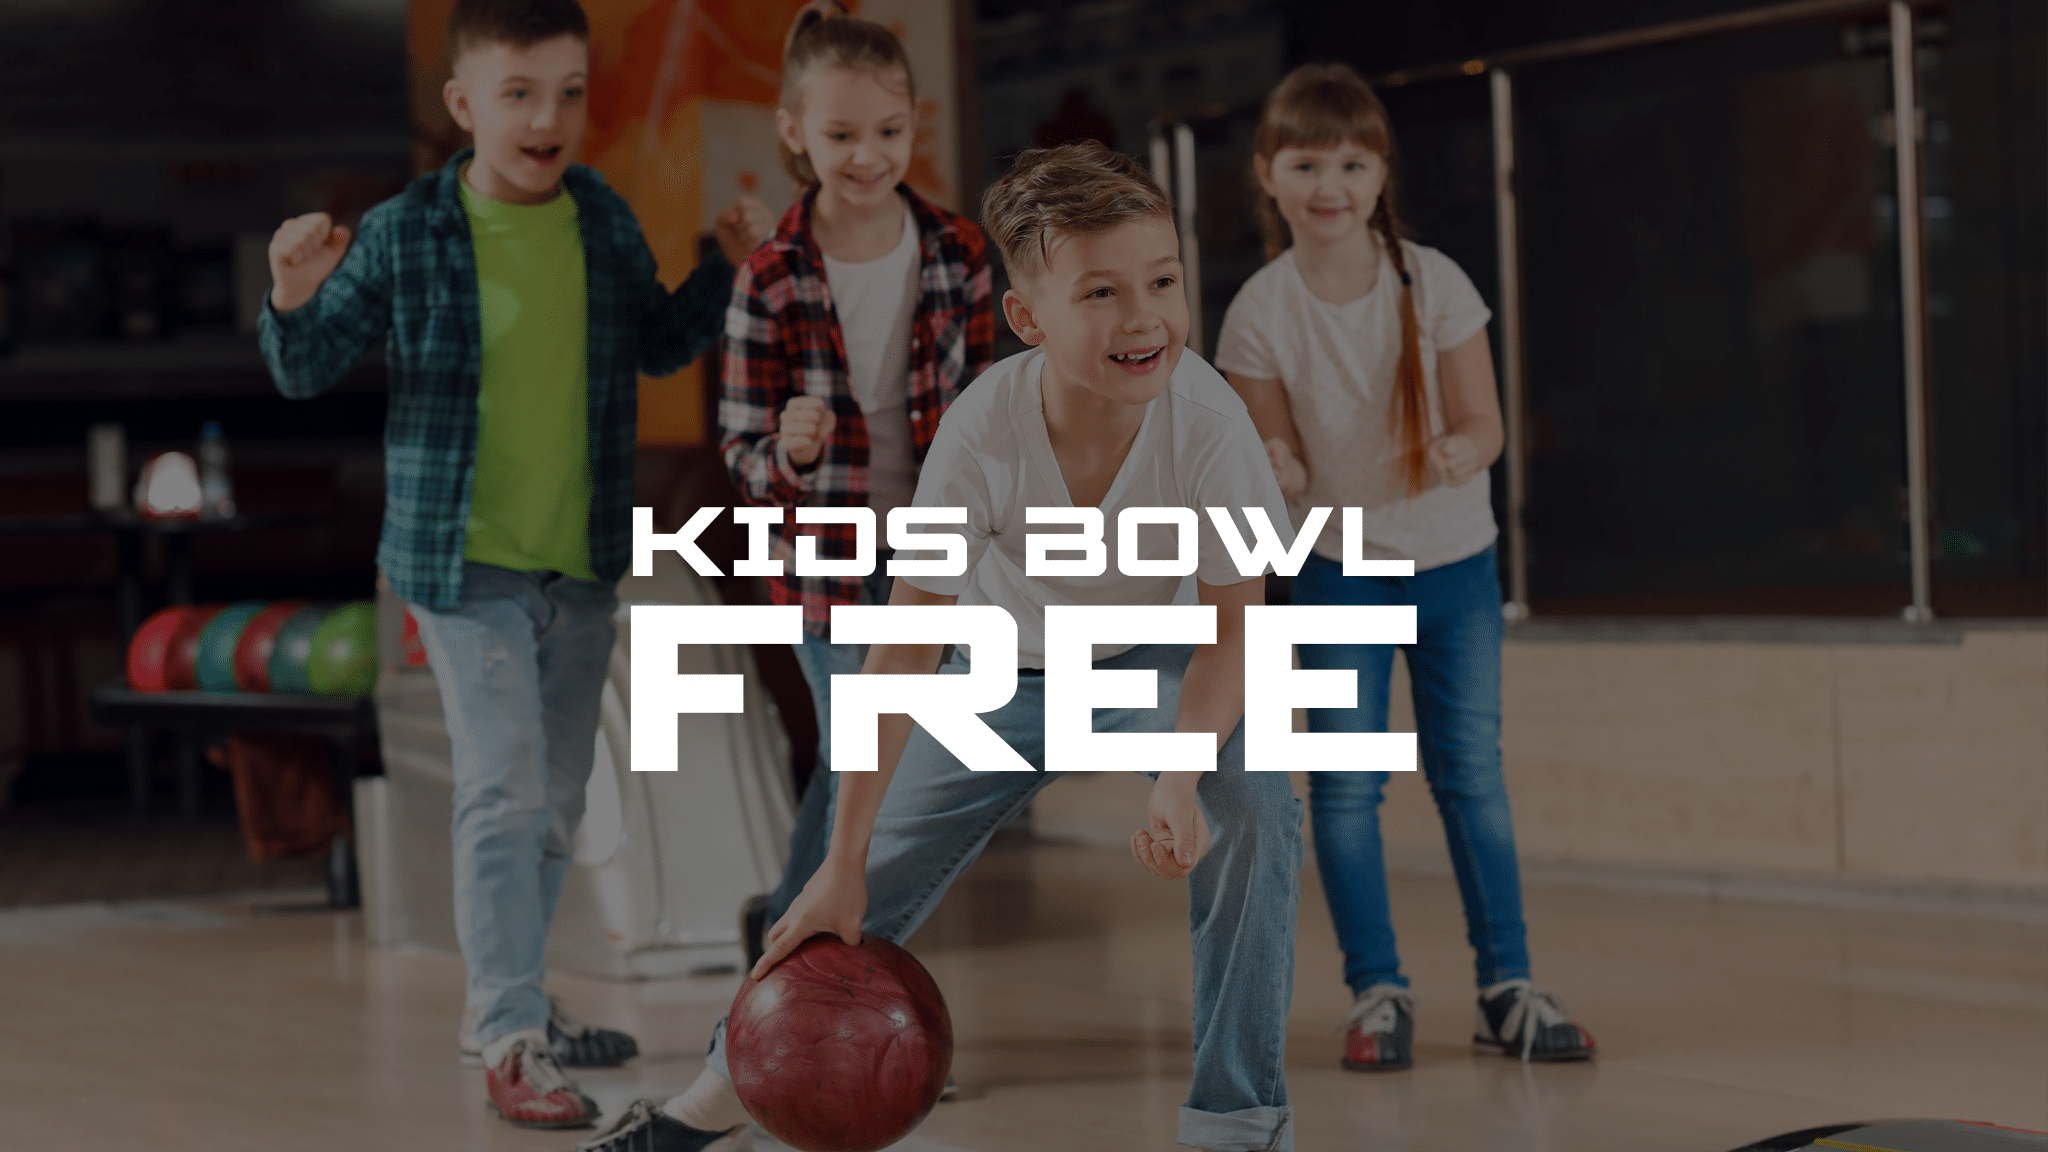 With this progrm kids bowl for free